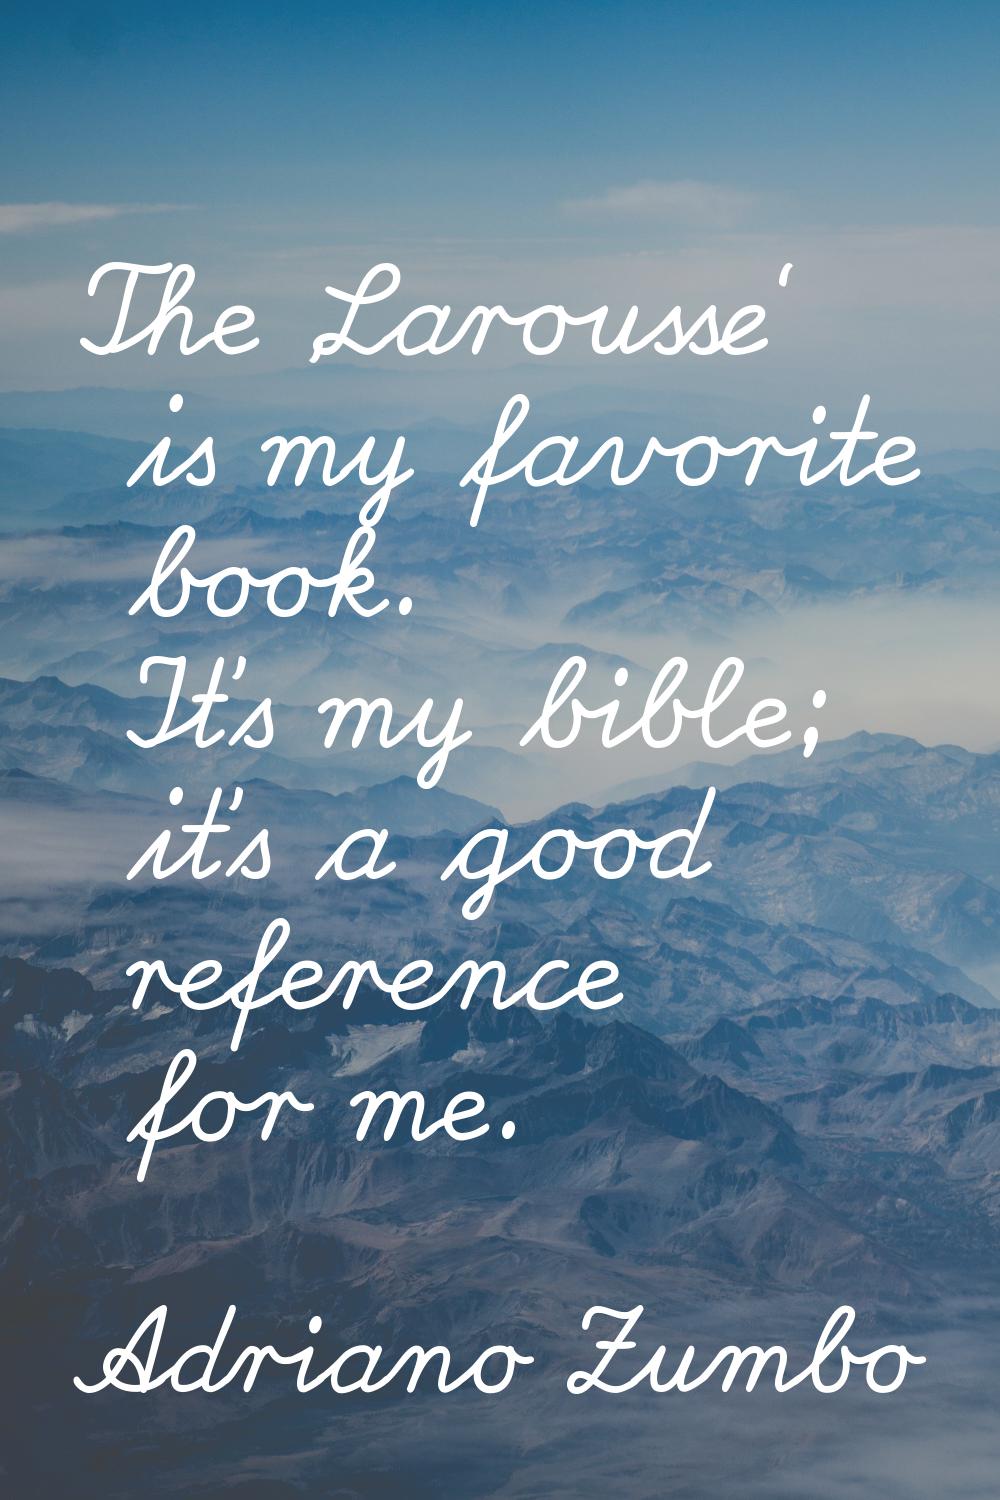 The 'Larousse' is my favorite book. It's my bible; it's a good reference for me.